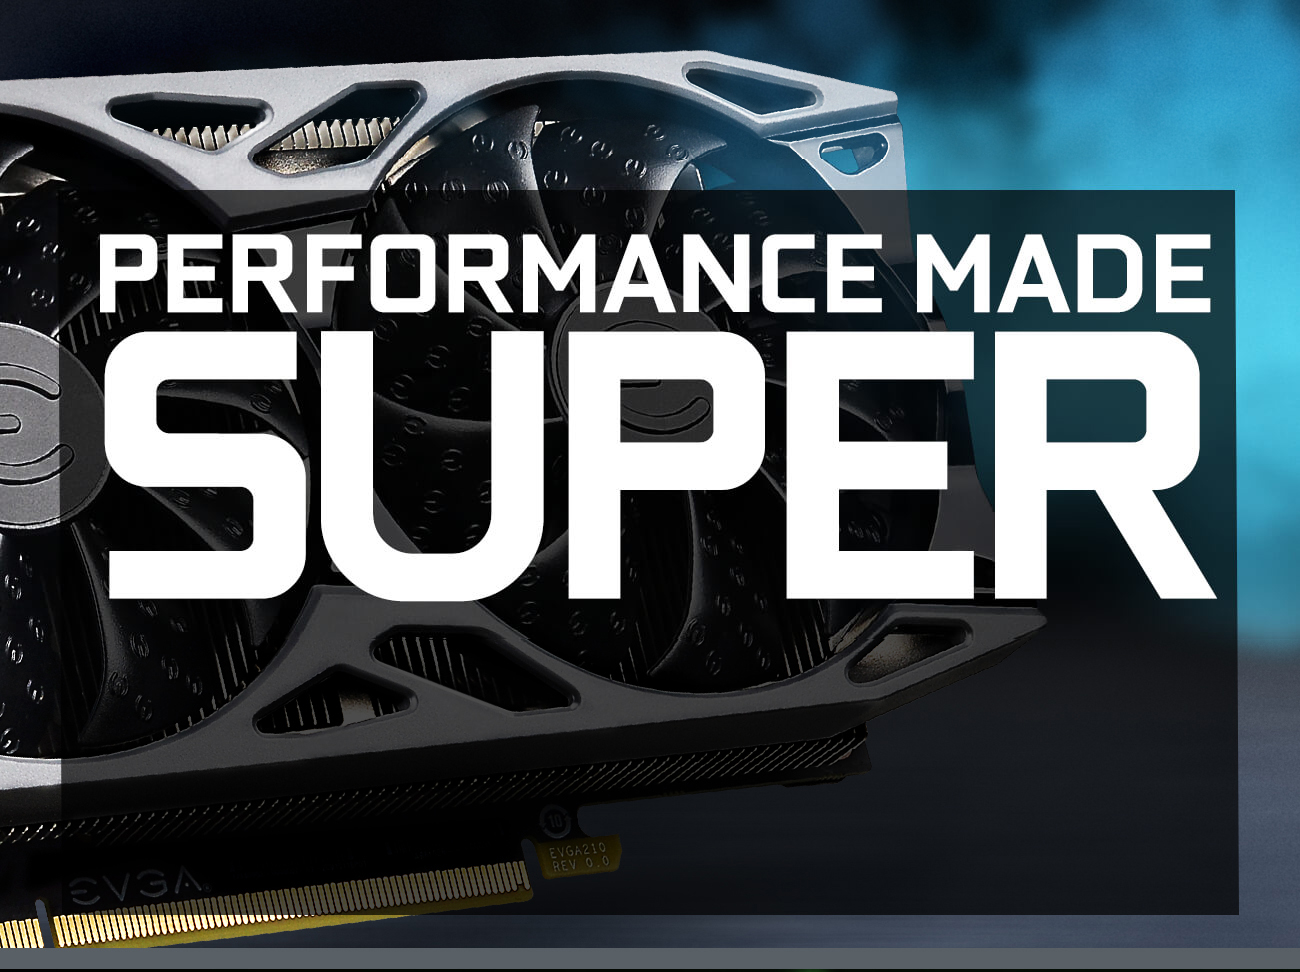 GeForce GTX 1650 SUPER gaming cards cloase-up and performance made super icon